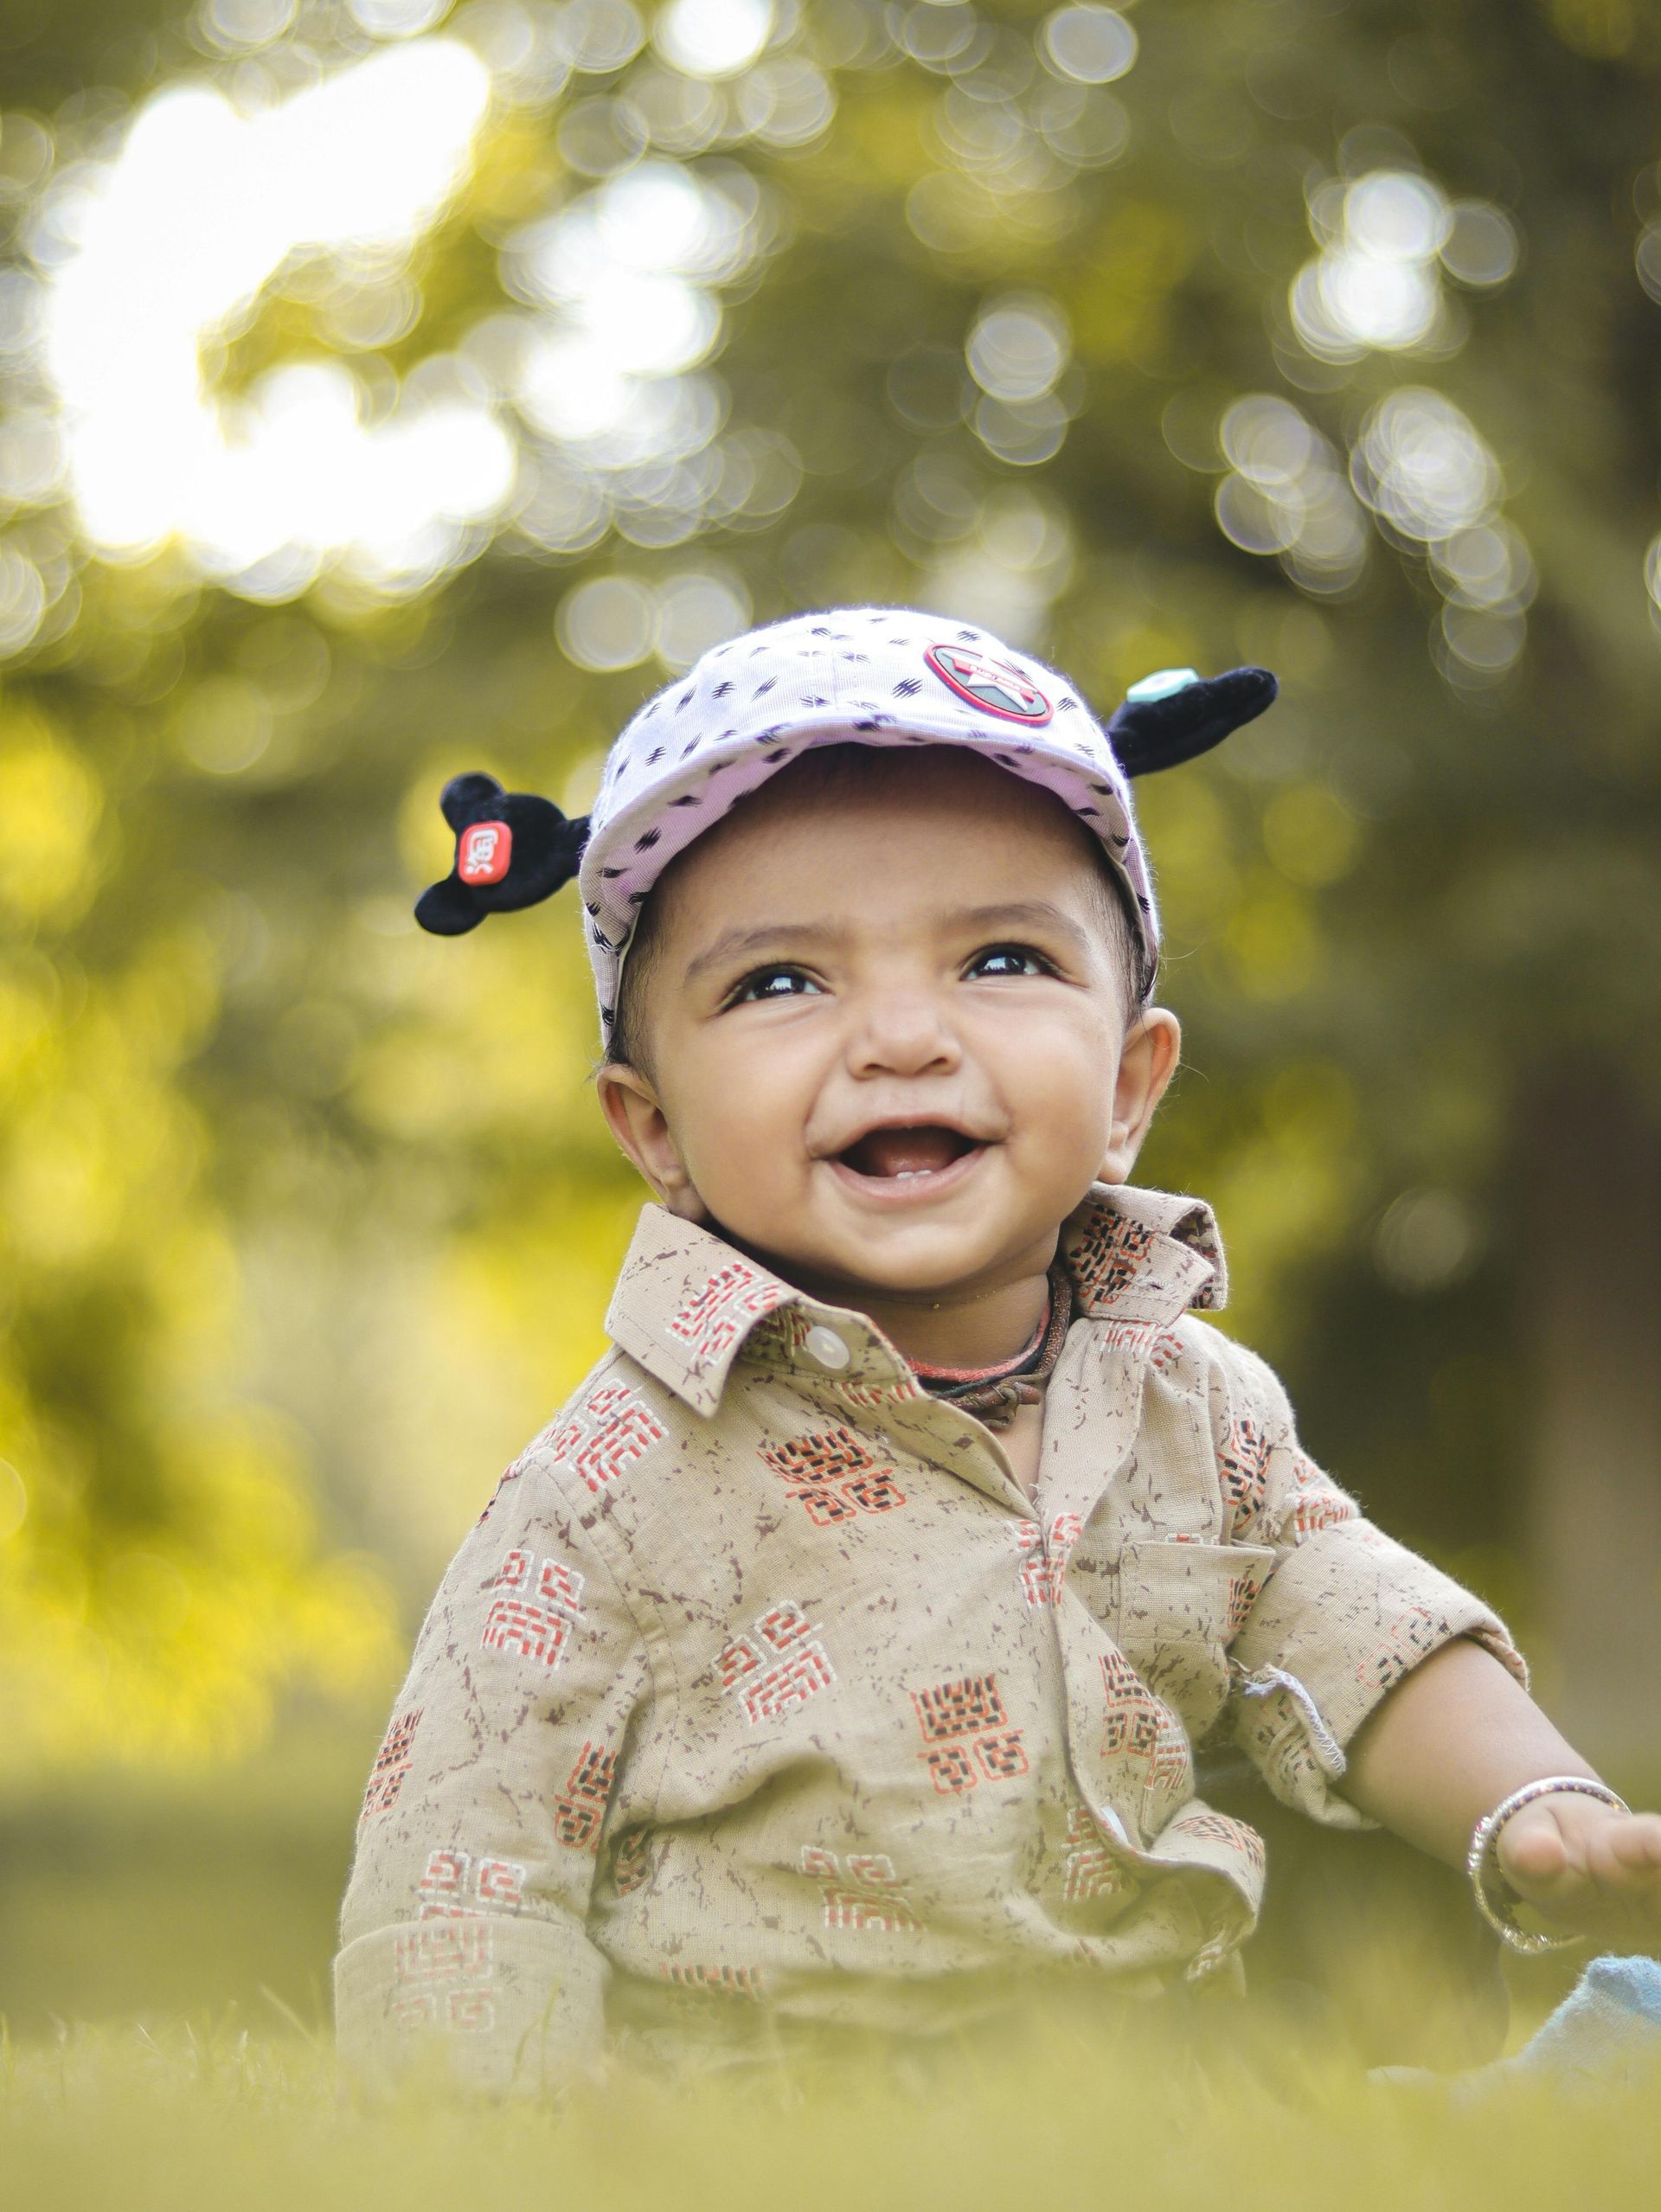 A baby is wearing a hat and smiling while sitting in the grass.